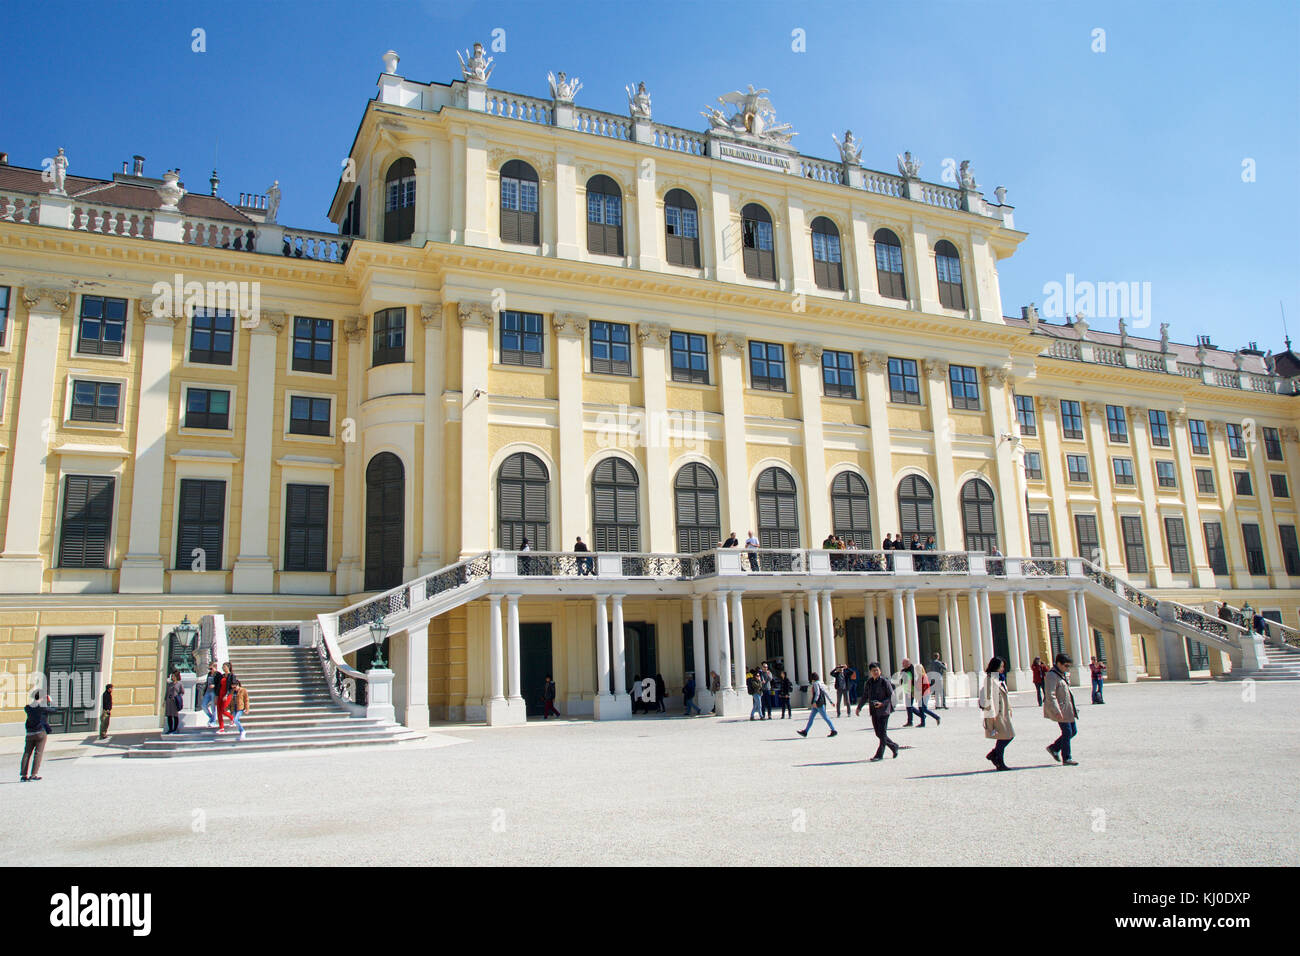 VIENNA, AUSTRIA - APR 30th, 2017: facade of Schoenbrunn palace, former imperial summer residence, built and remodelled during reign of Empress Maria Theresa in 1743 Stock Photo